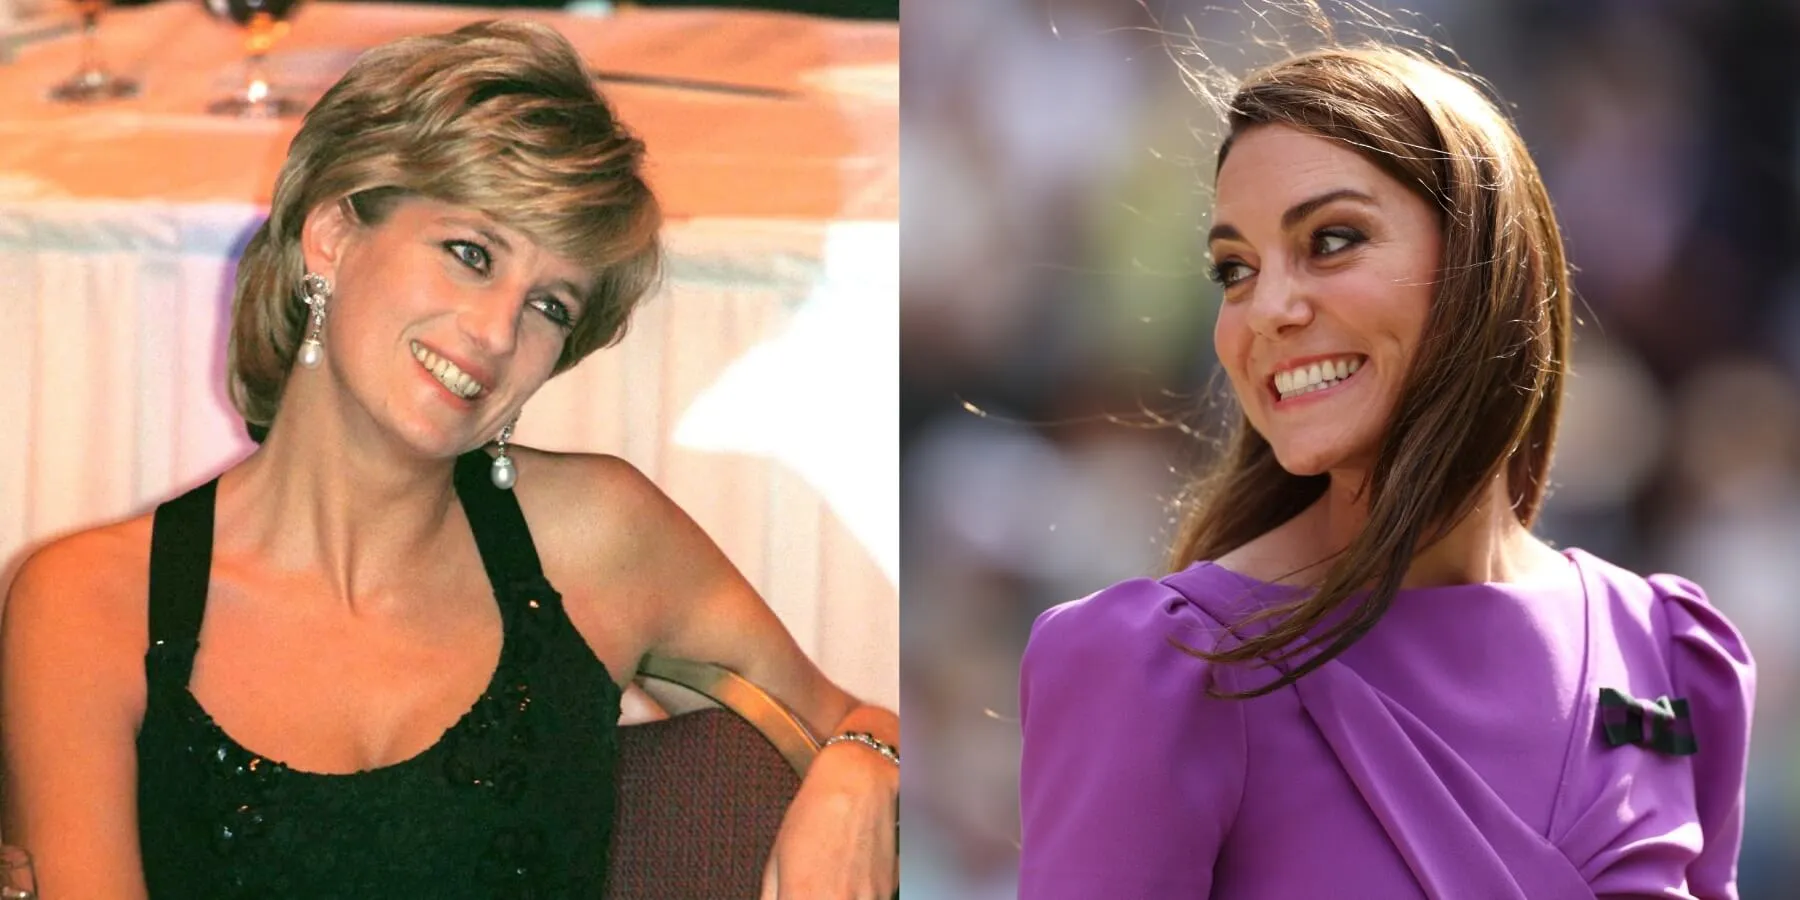 Princess Diana and Kate Middleton in side-by-side photographs